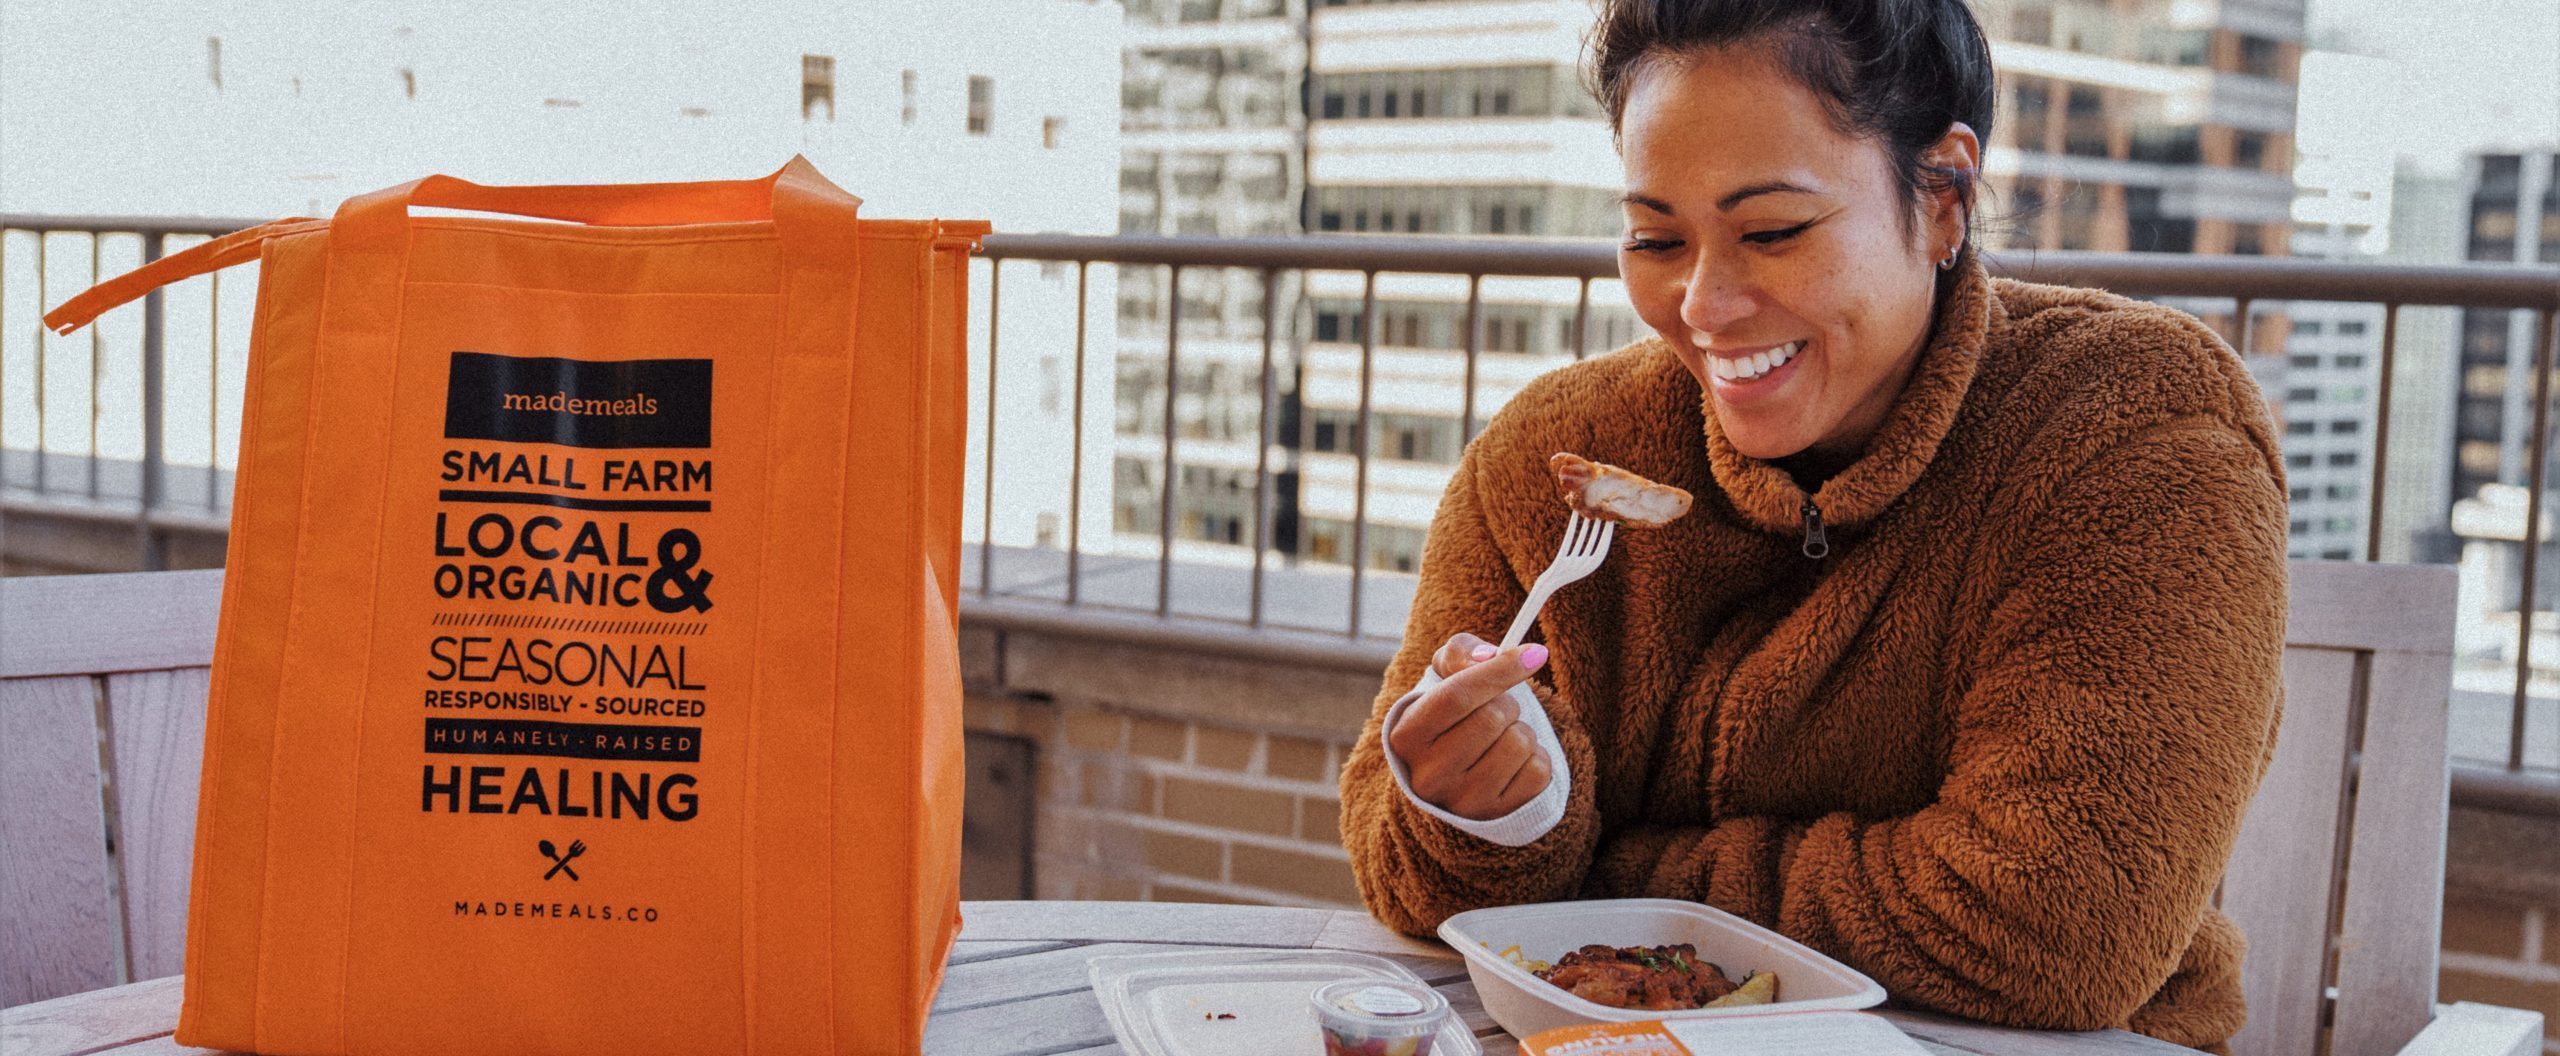 7 NYC Meal Delivery Services to Make Your Life Easier - Mommy Nearest